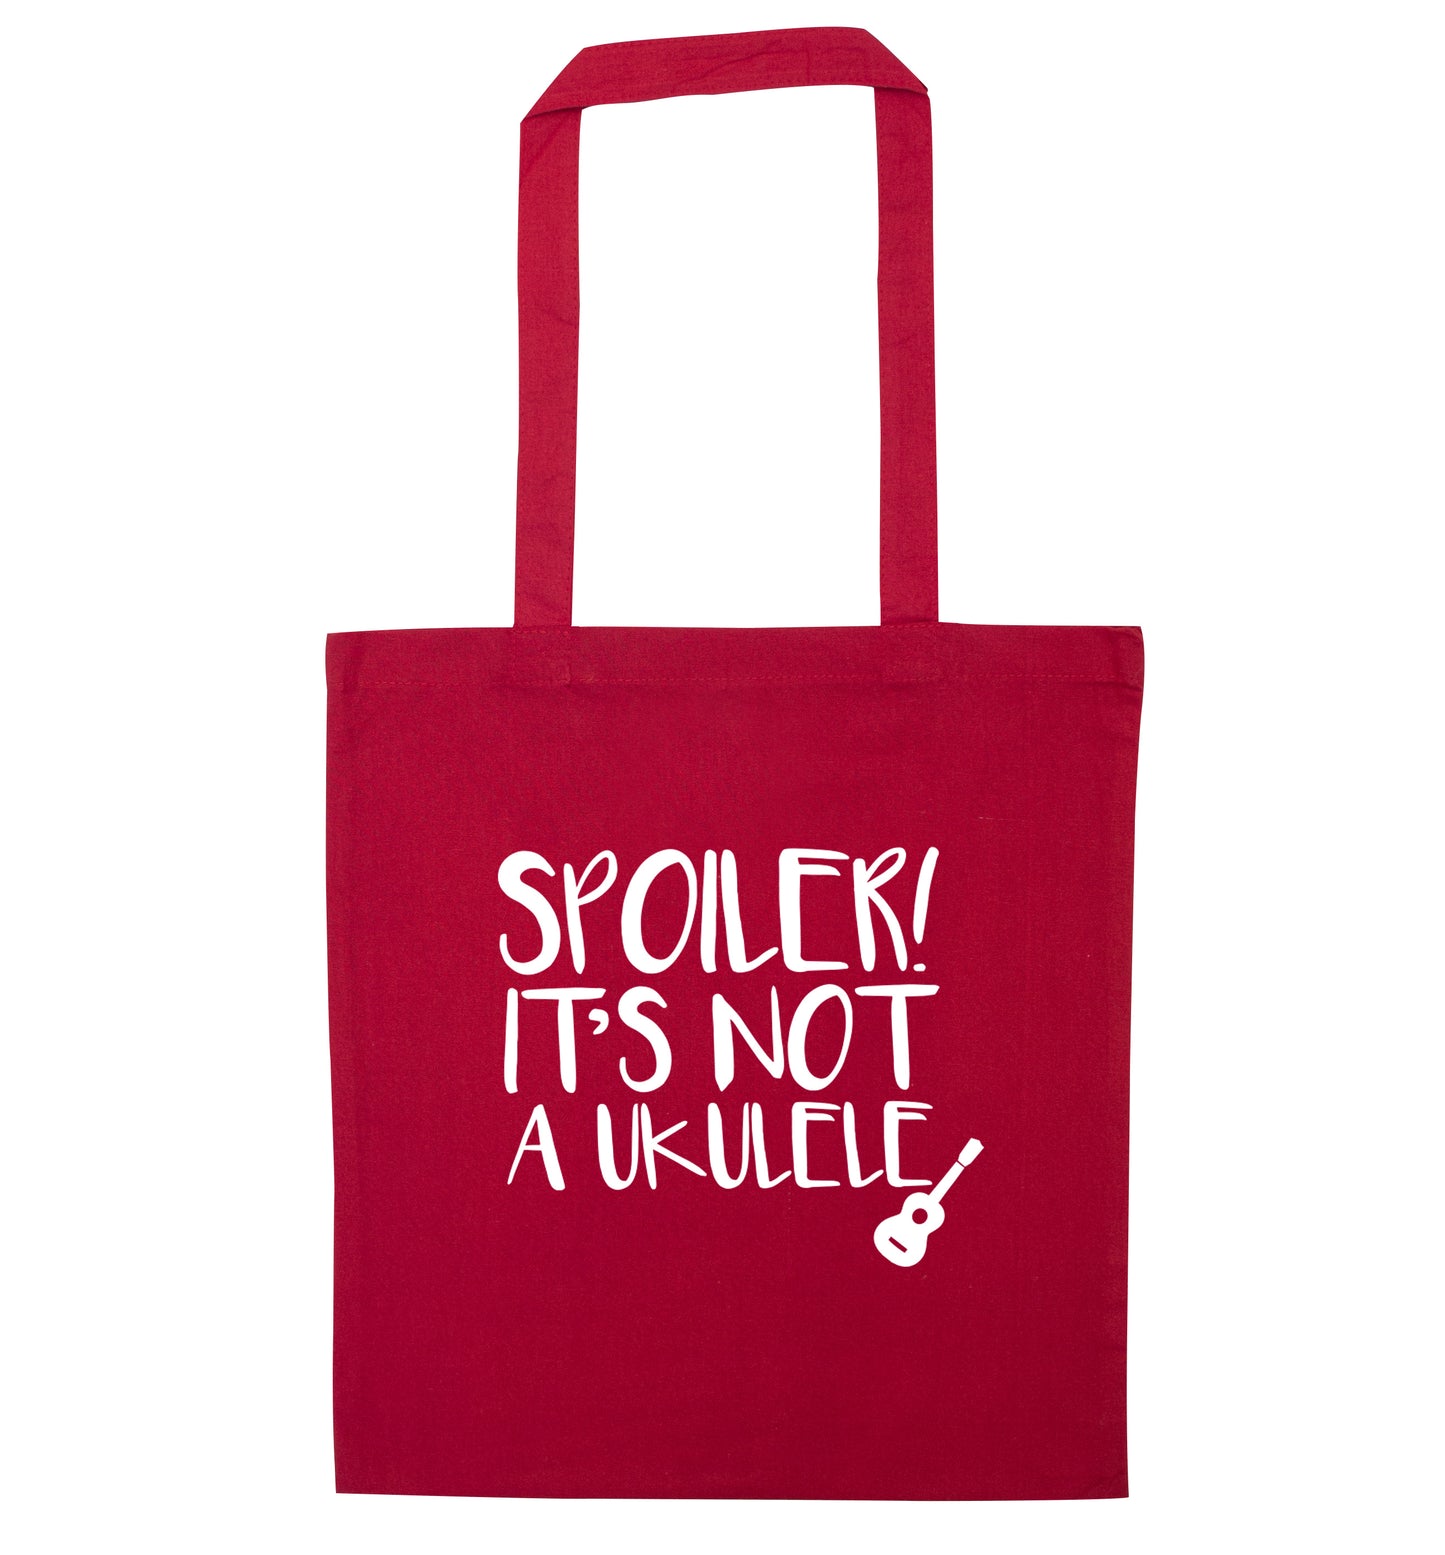 Spoiler it's not a ukulele red tote bag